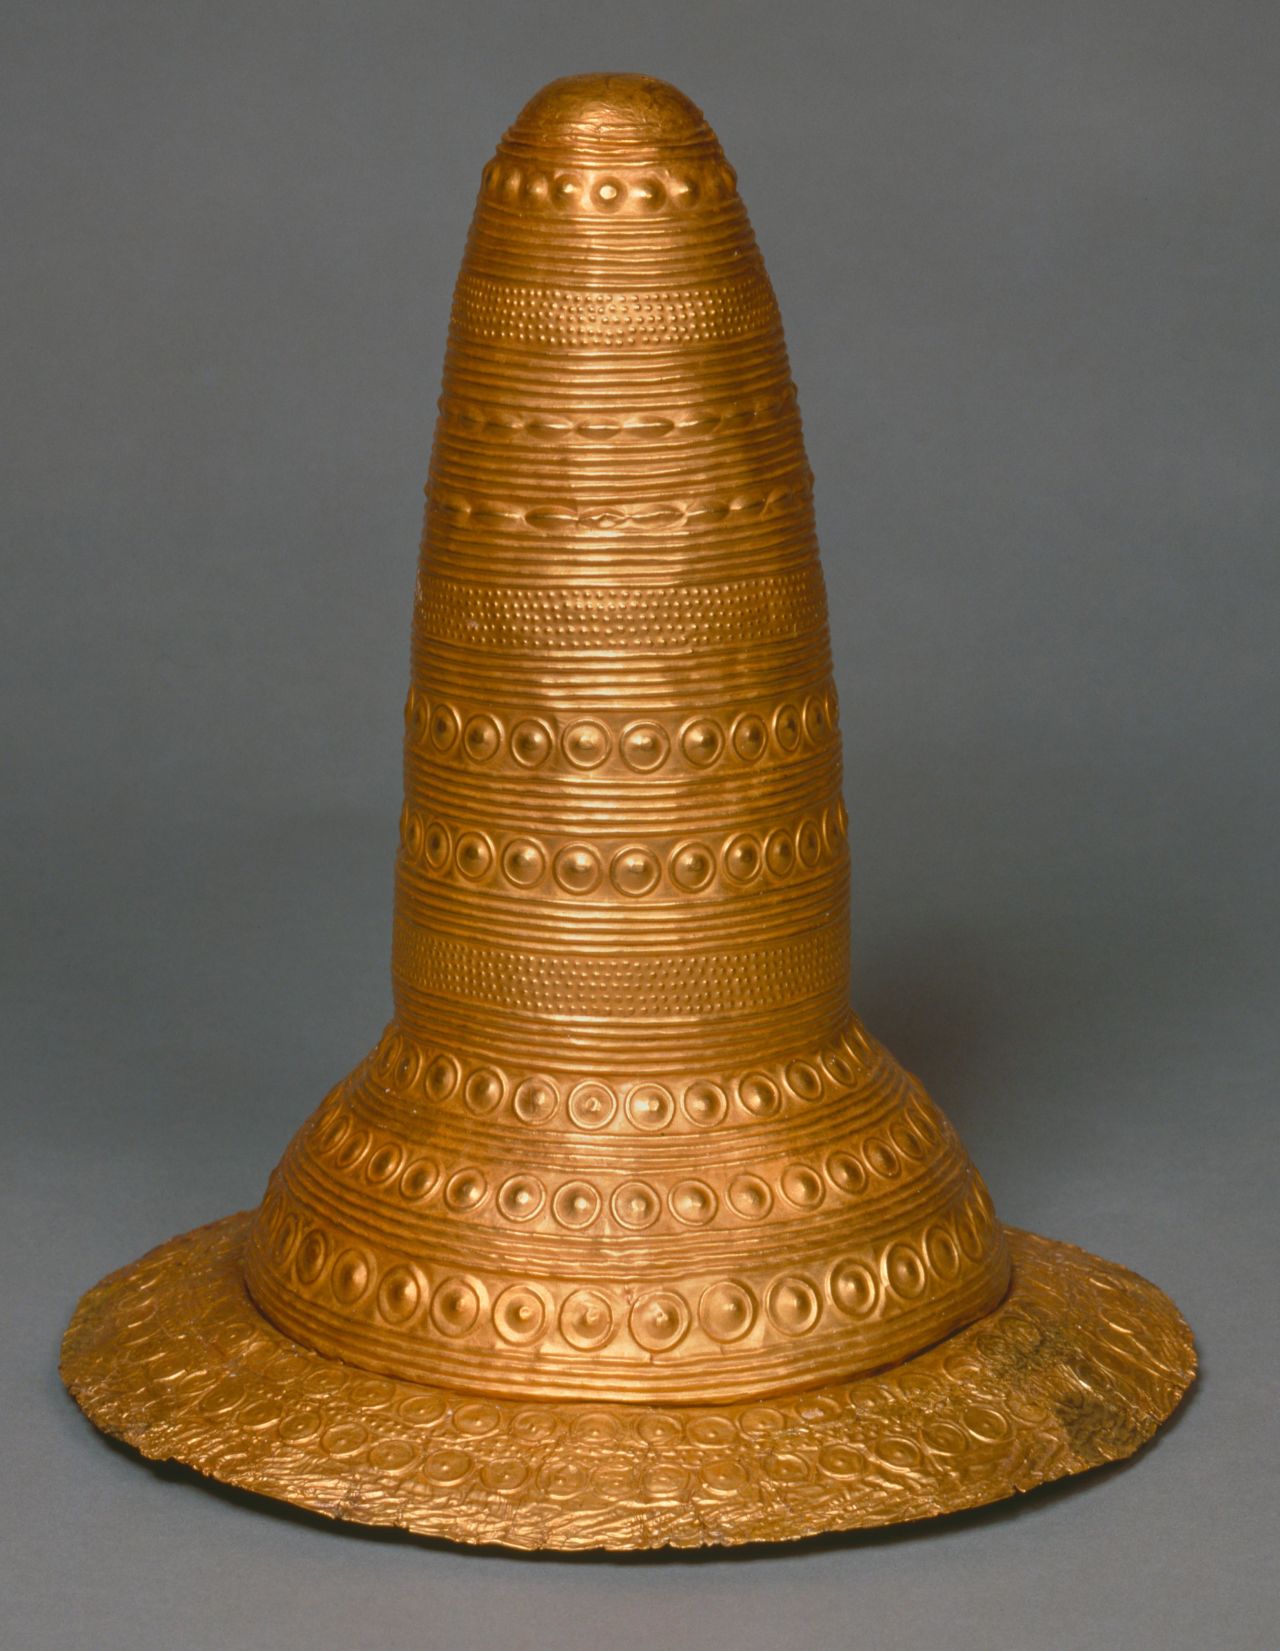 The Schifferstadt gold hat dates from 1600 BC and was found in Germany. It's thought that it could be a cosmic calendar.